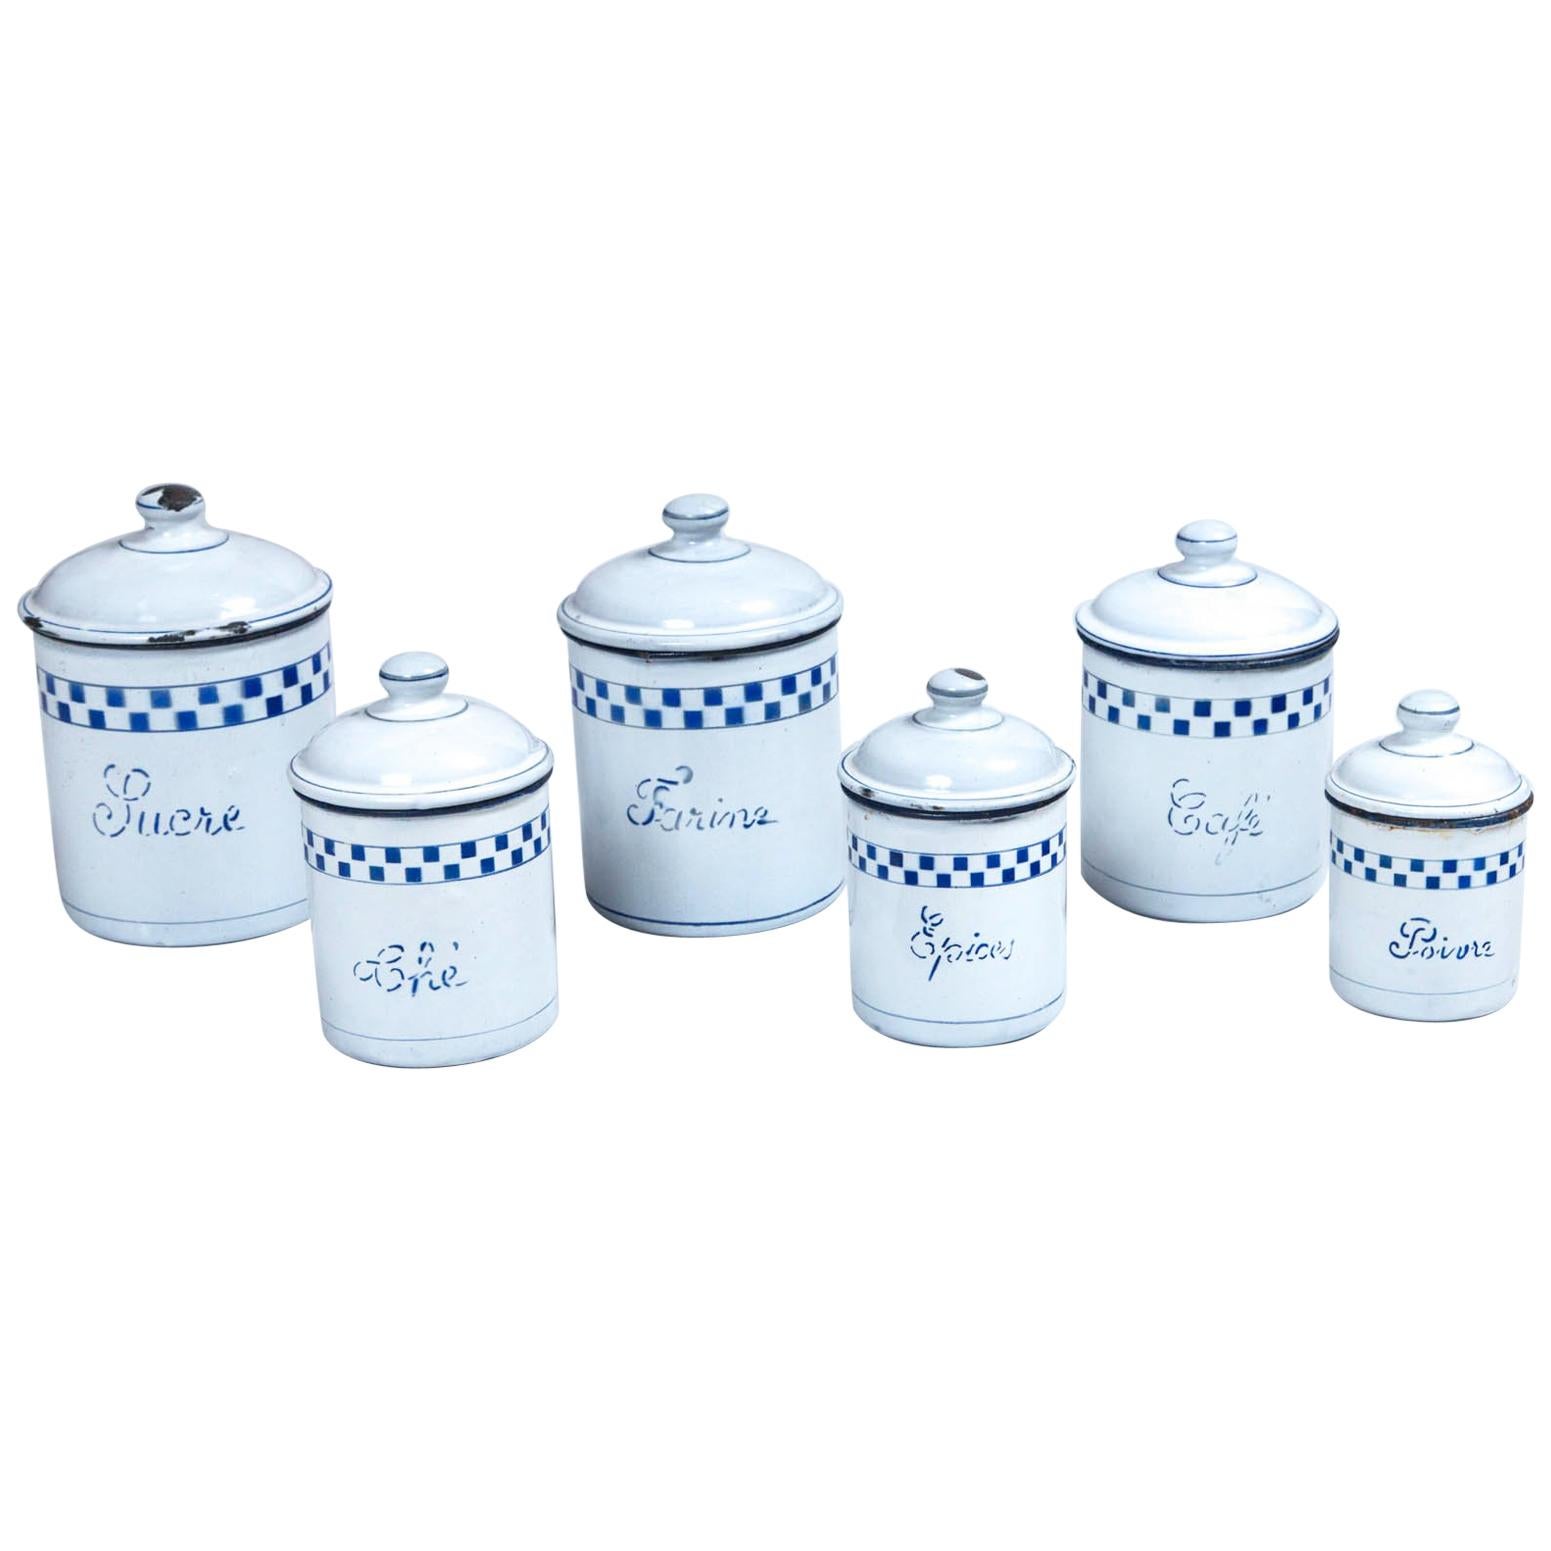 French Enamelware Cannister Set, circa 1920